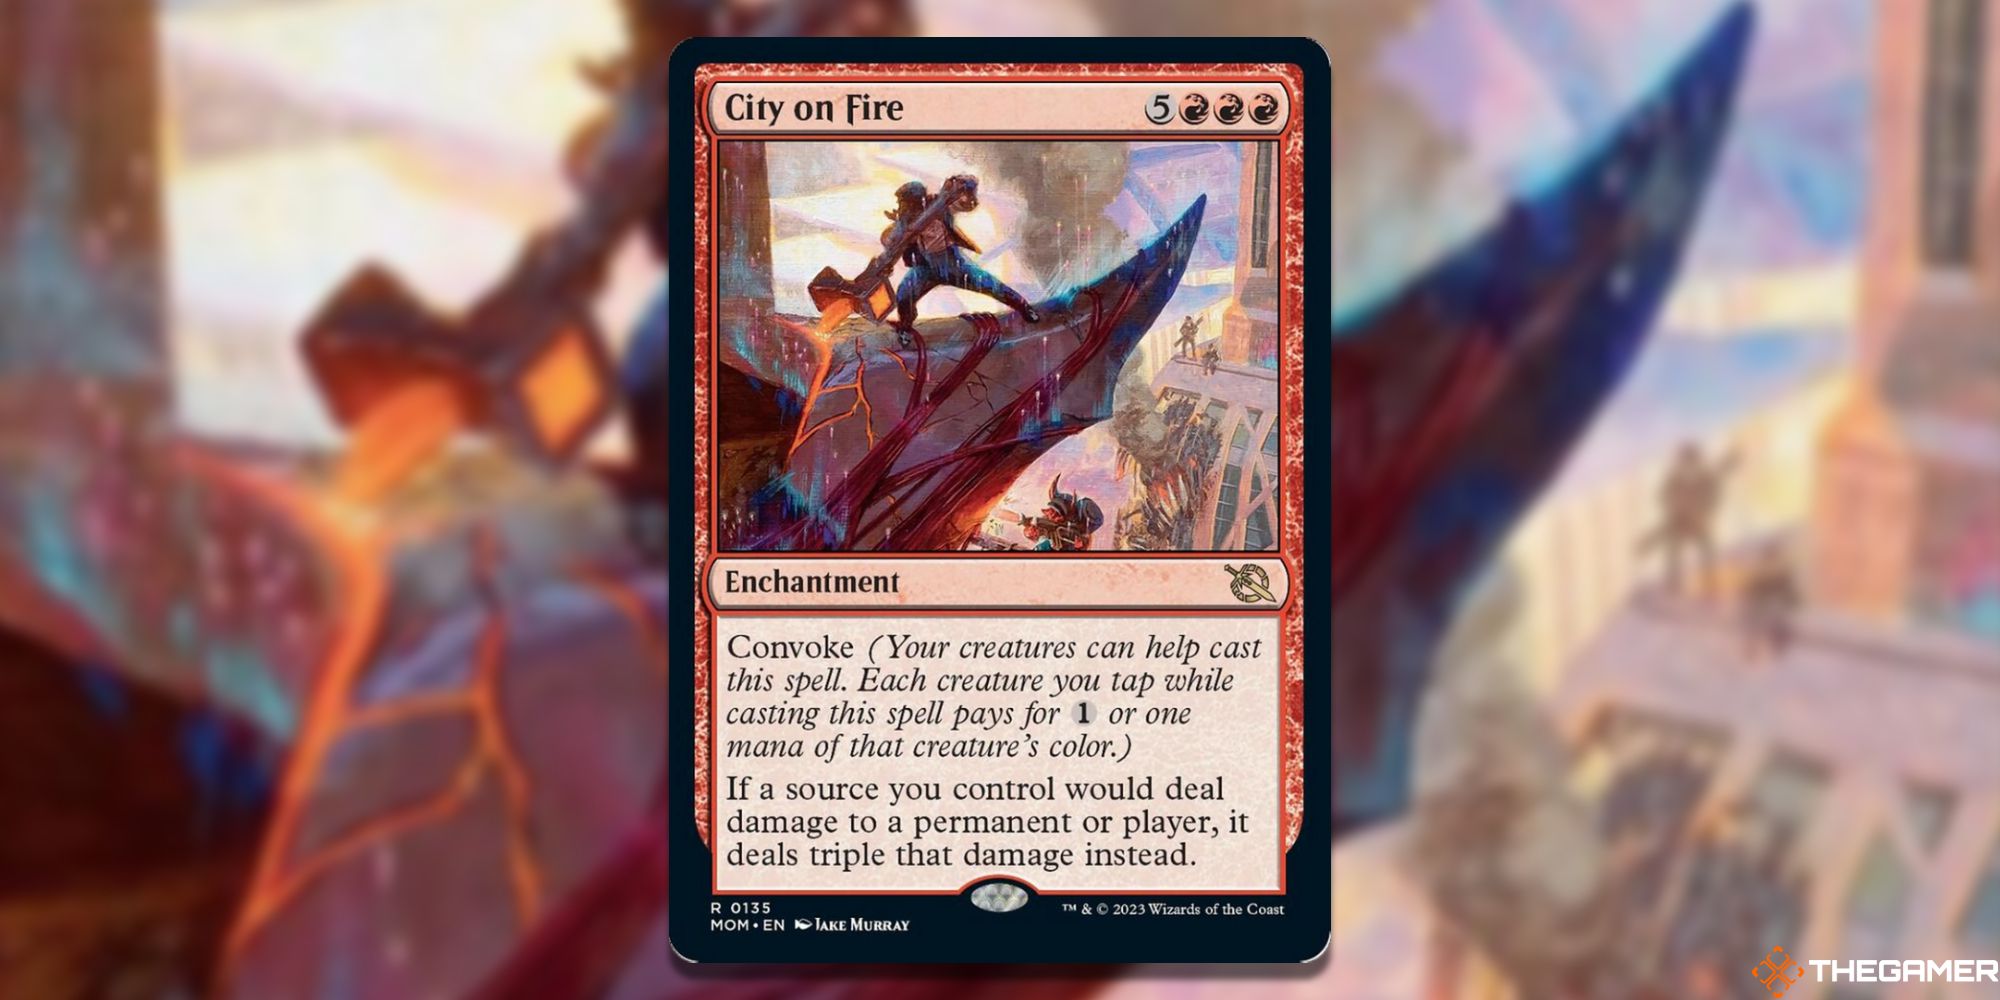 City on Fire card image from Magic: The Gathering, art by Jake Murray